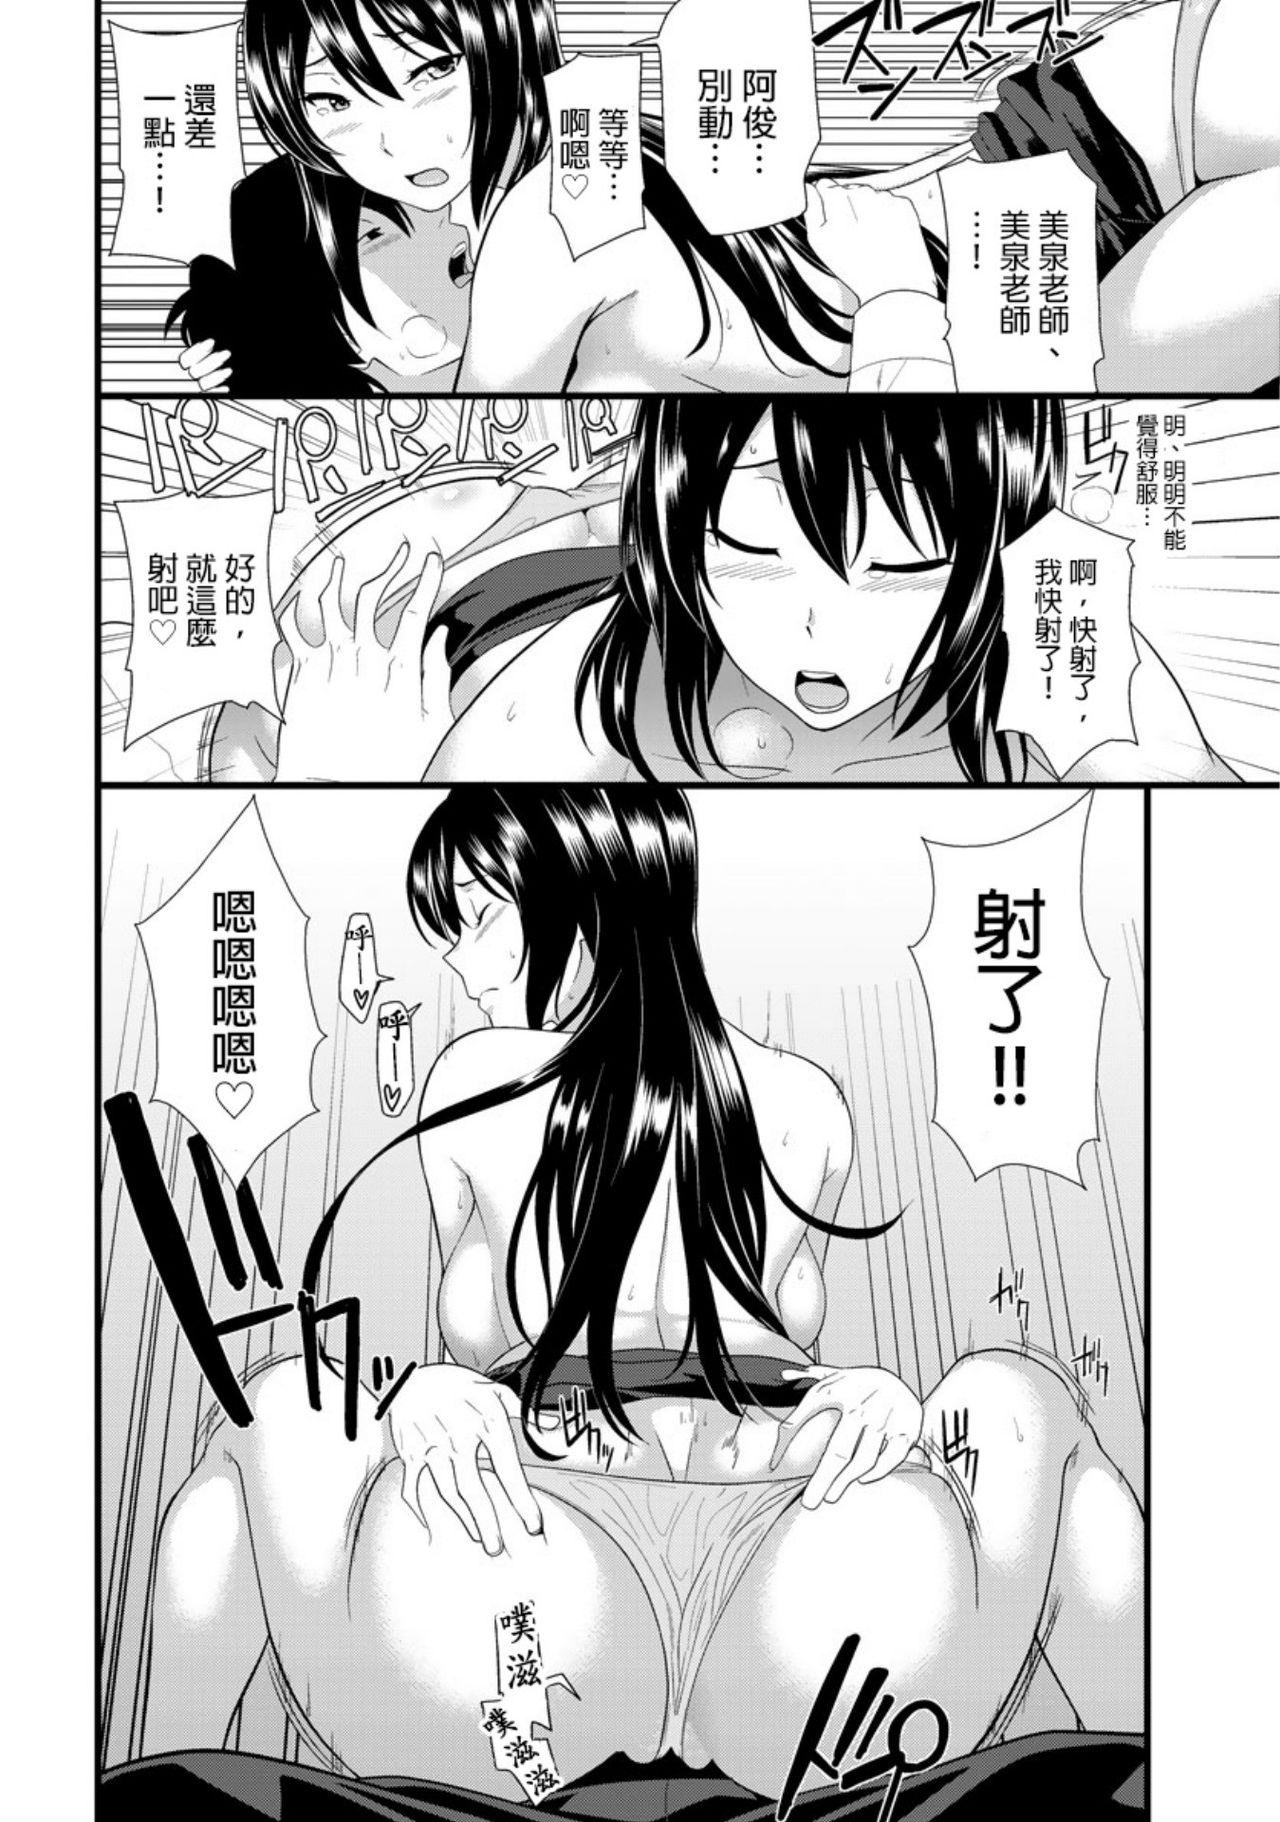 Spreading 教え子に襲ワレル人妻は抵抗できなくて Ch.2 Free Fuck - Page 11